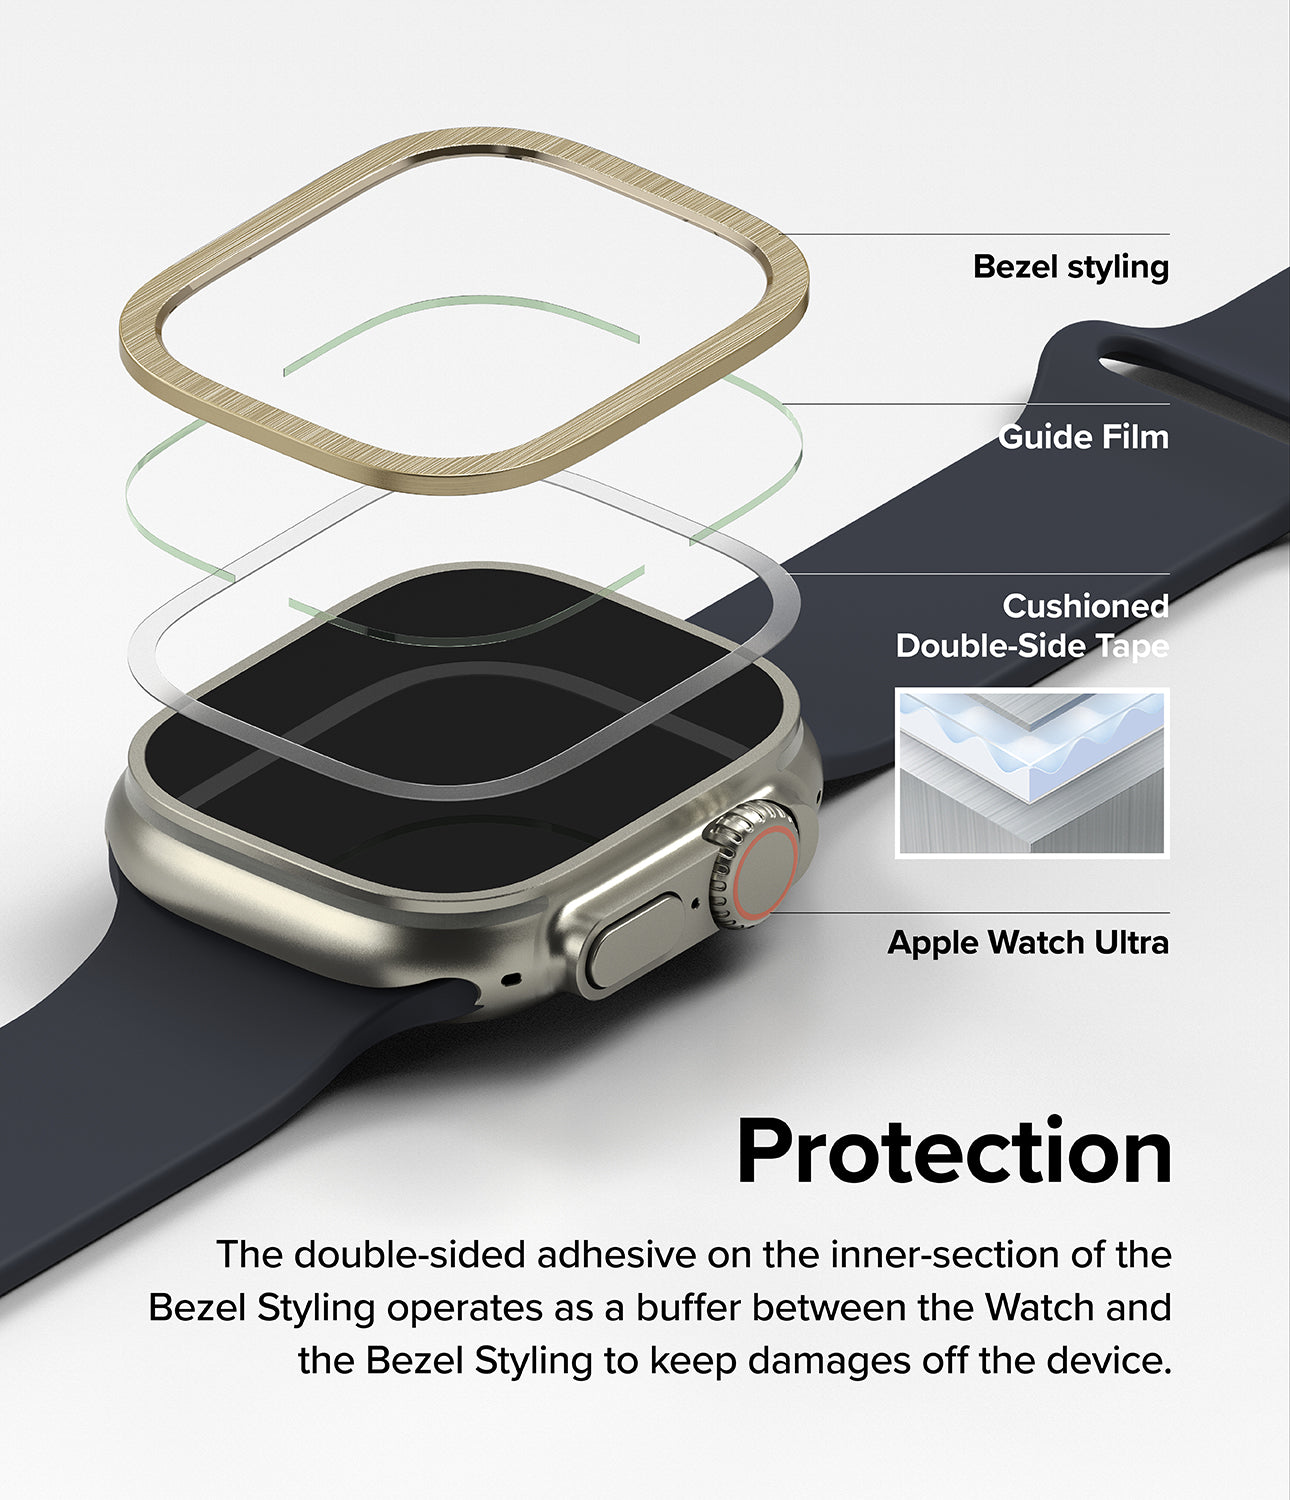 Protection - The double-sided adhesive on the inner-section of the Bezel Styling operates as a buffer between the Watch and the Bezel Styling to keep damages off the device.